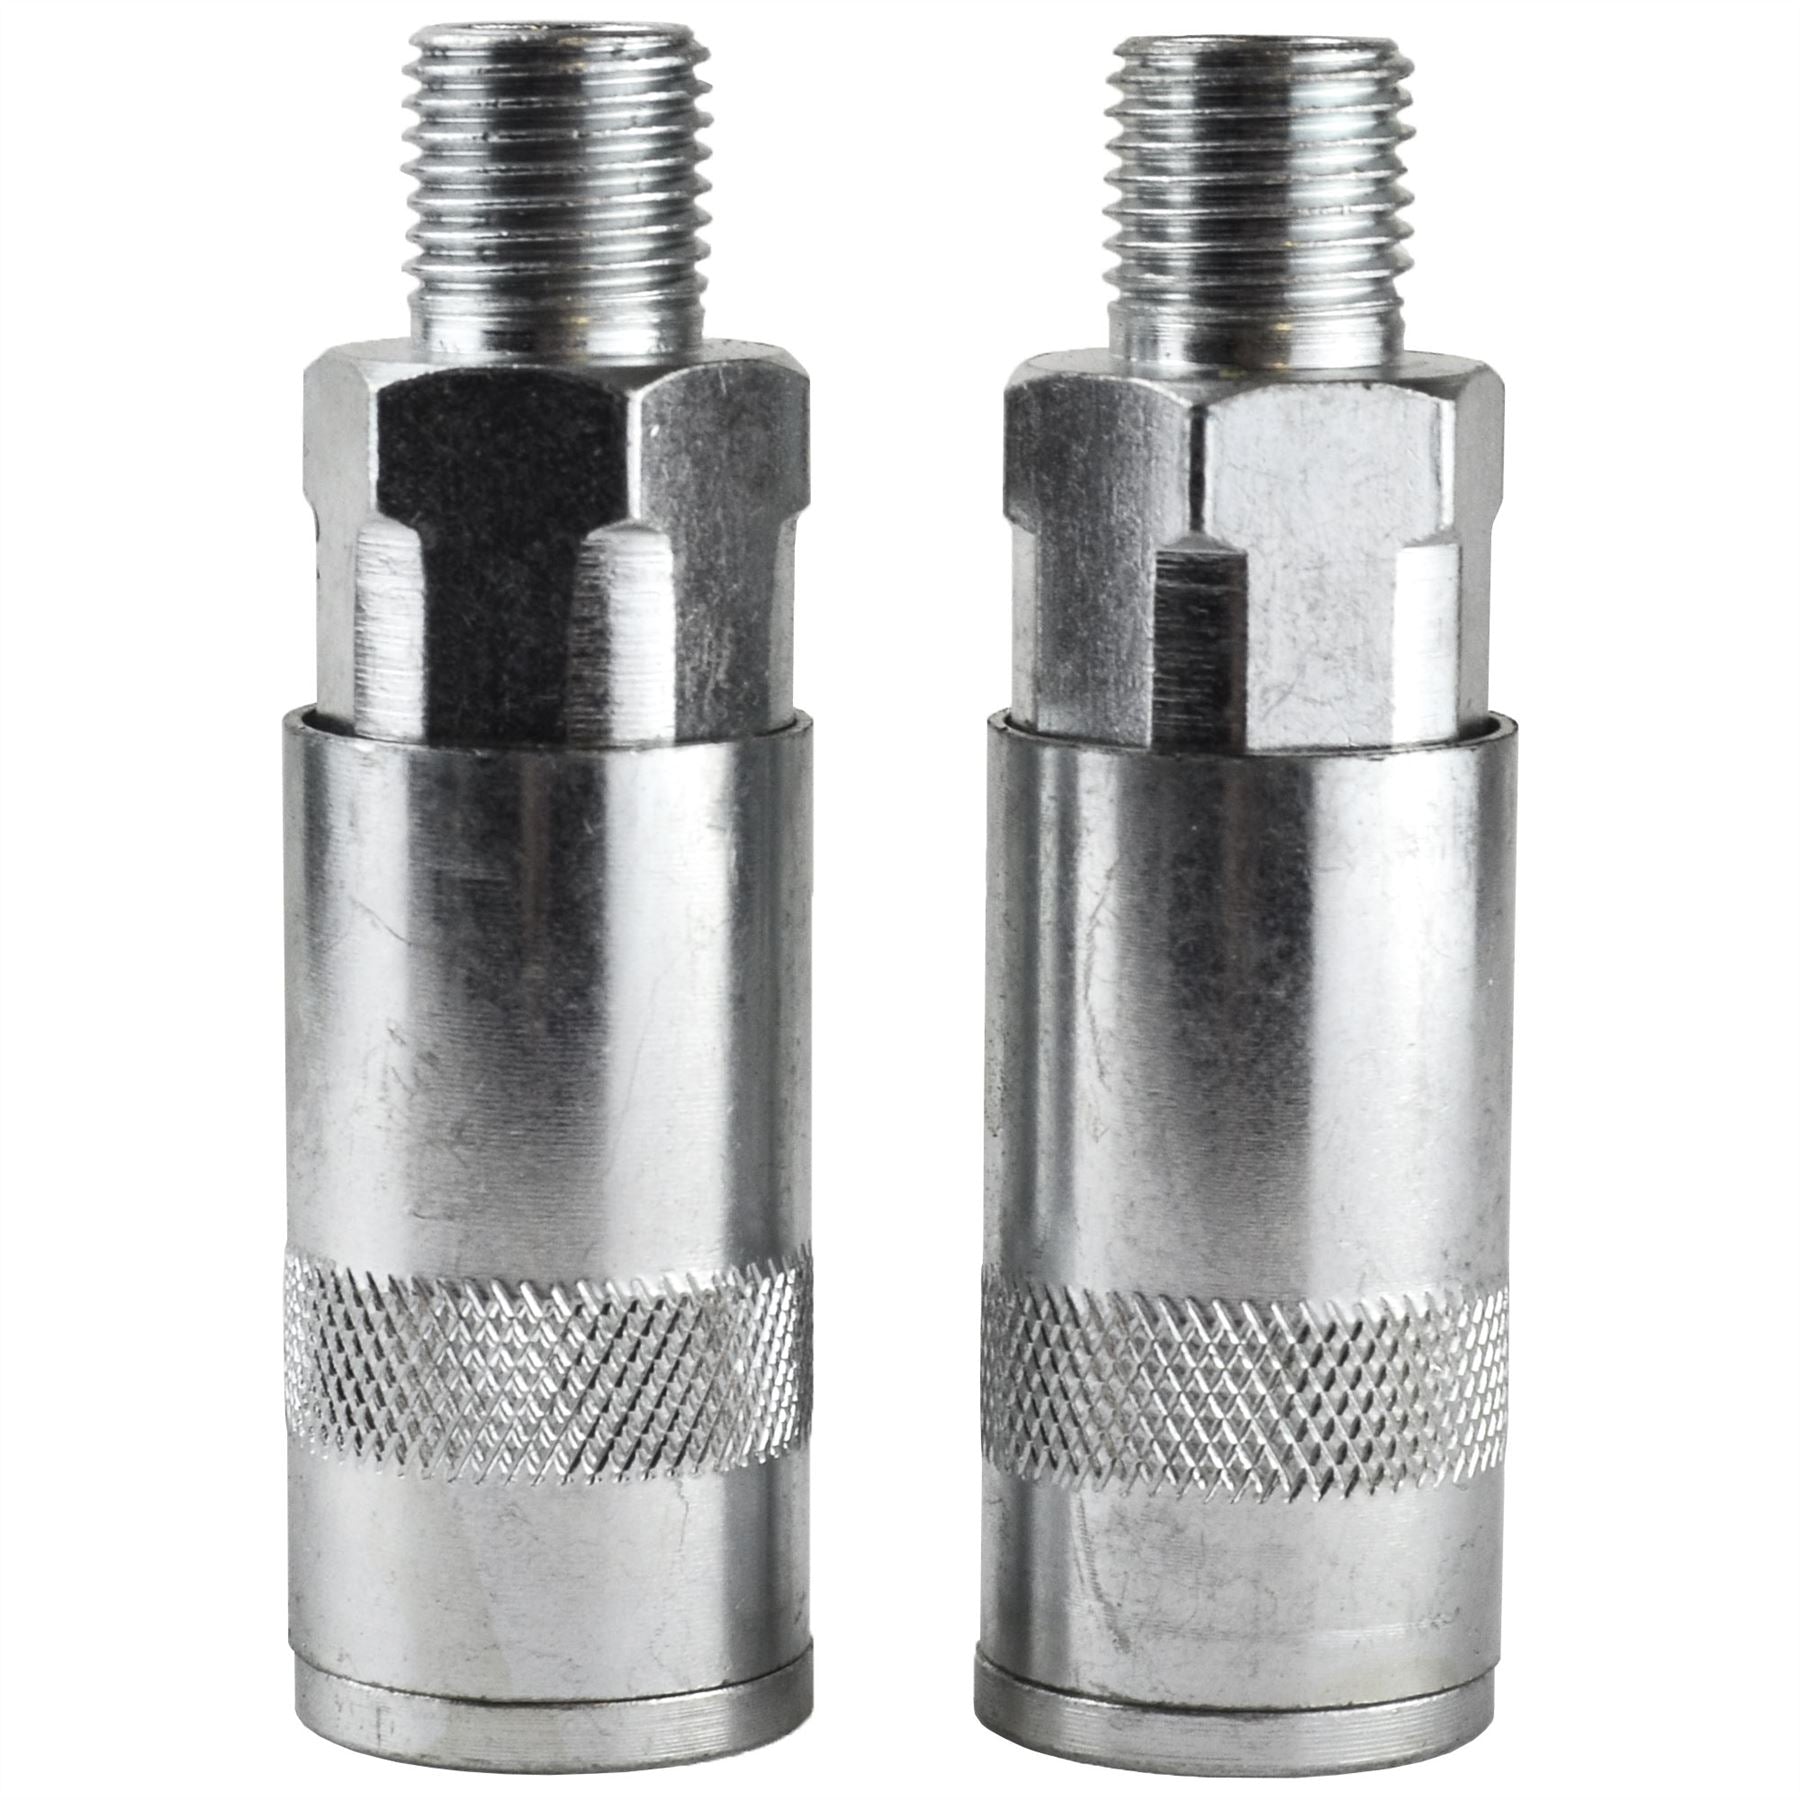 Quick Release / Coupler Male Air Line Hose Connectors / Fittings 1/4" BSP SIL243